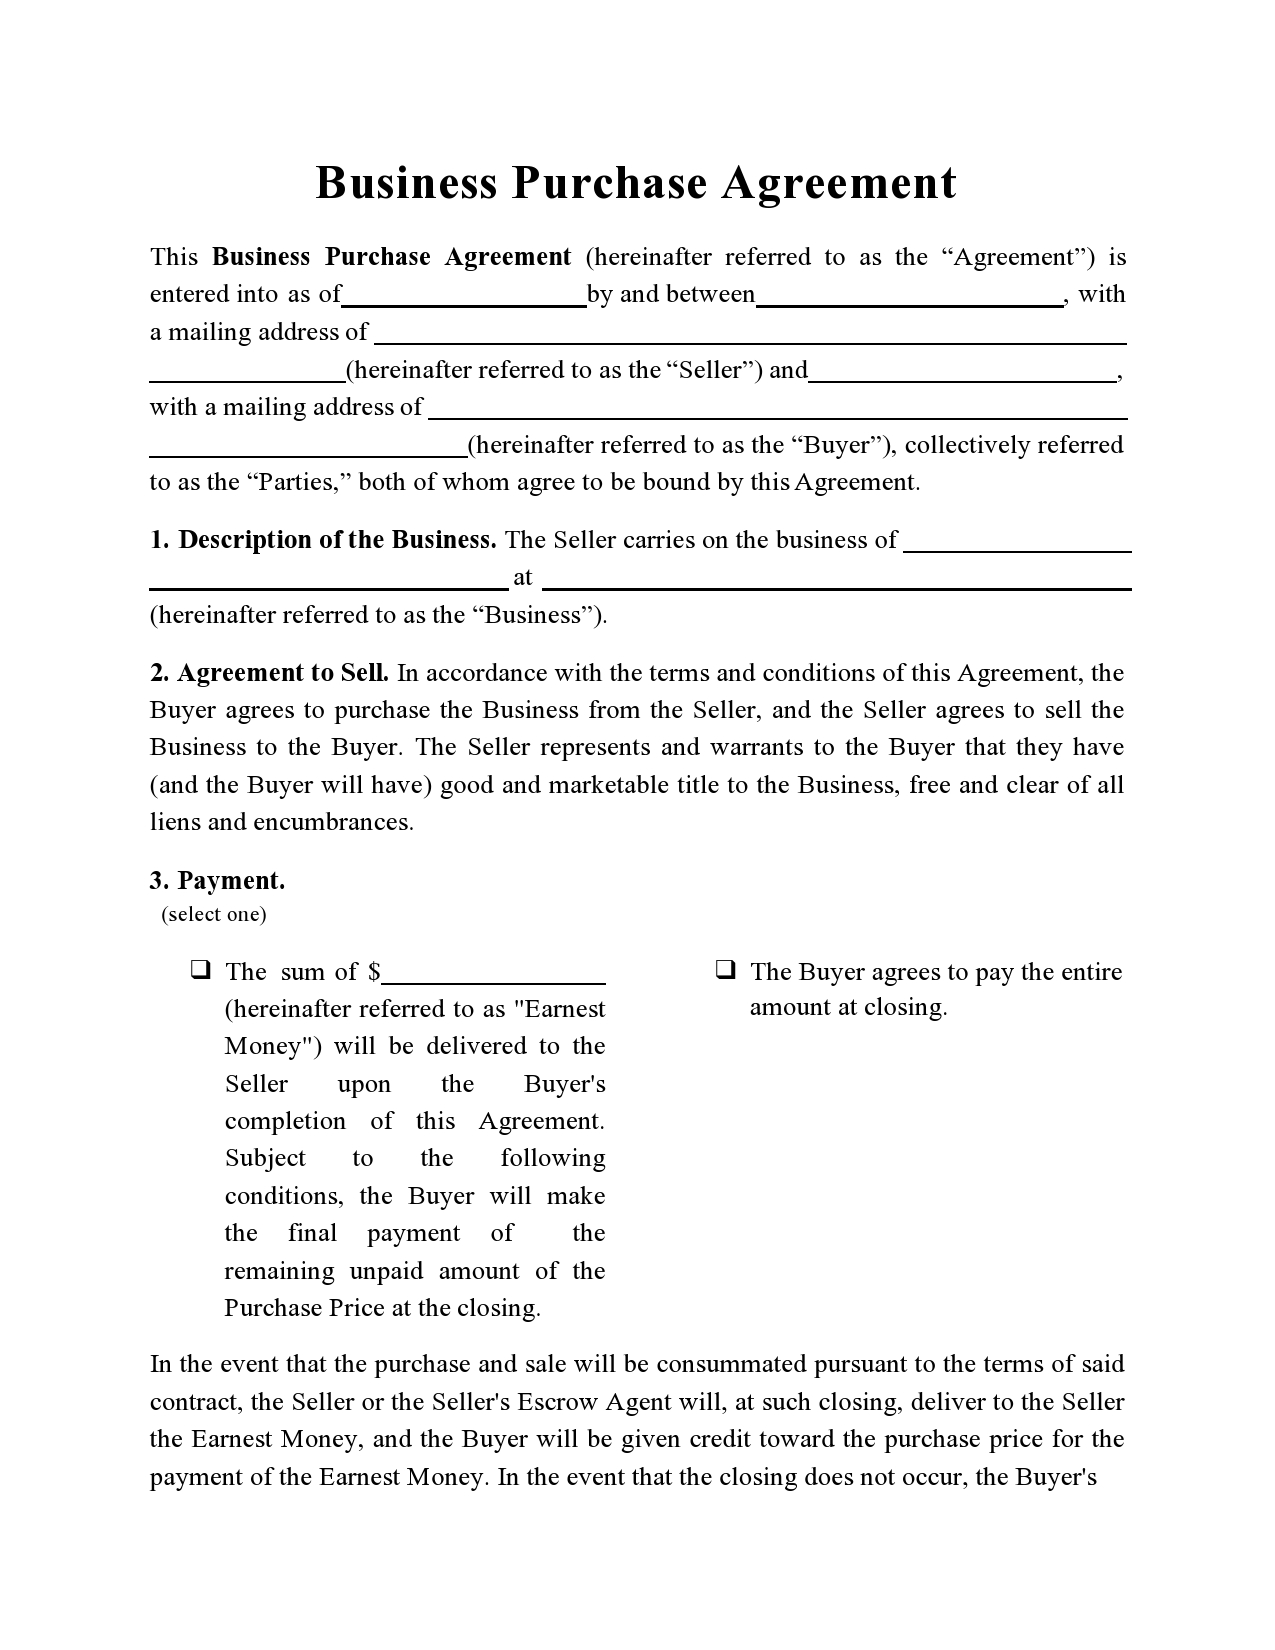 Free business purchase agreement 12